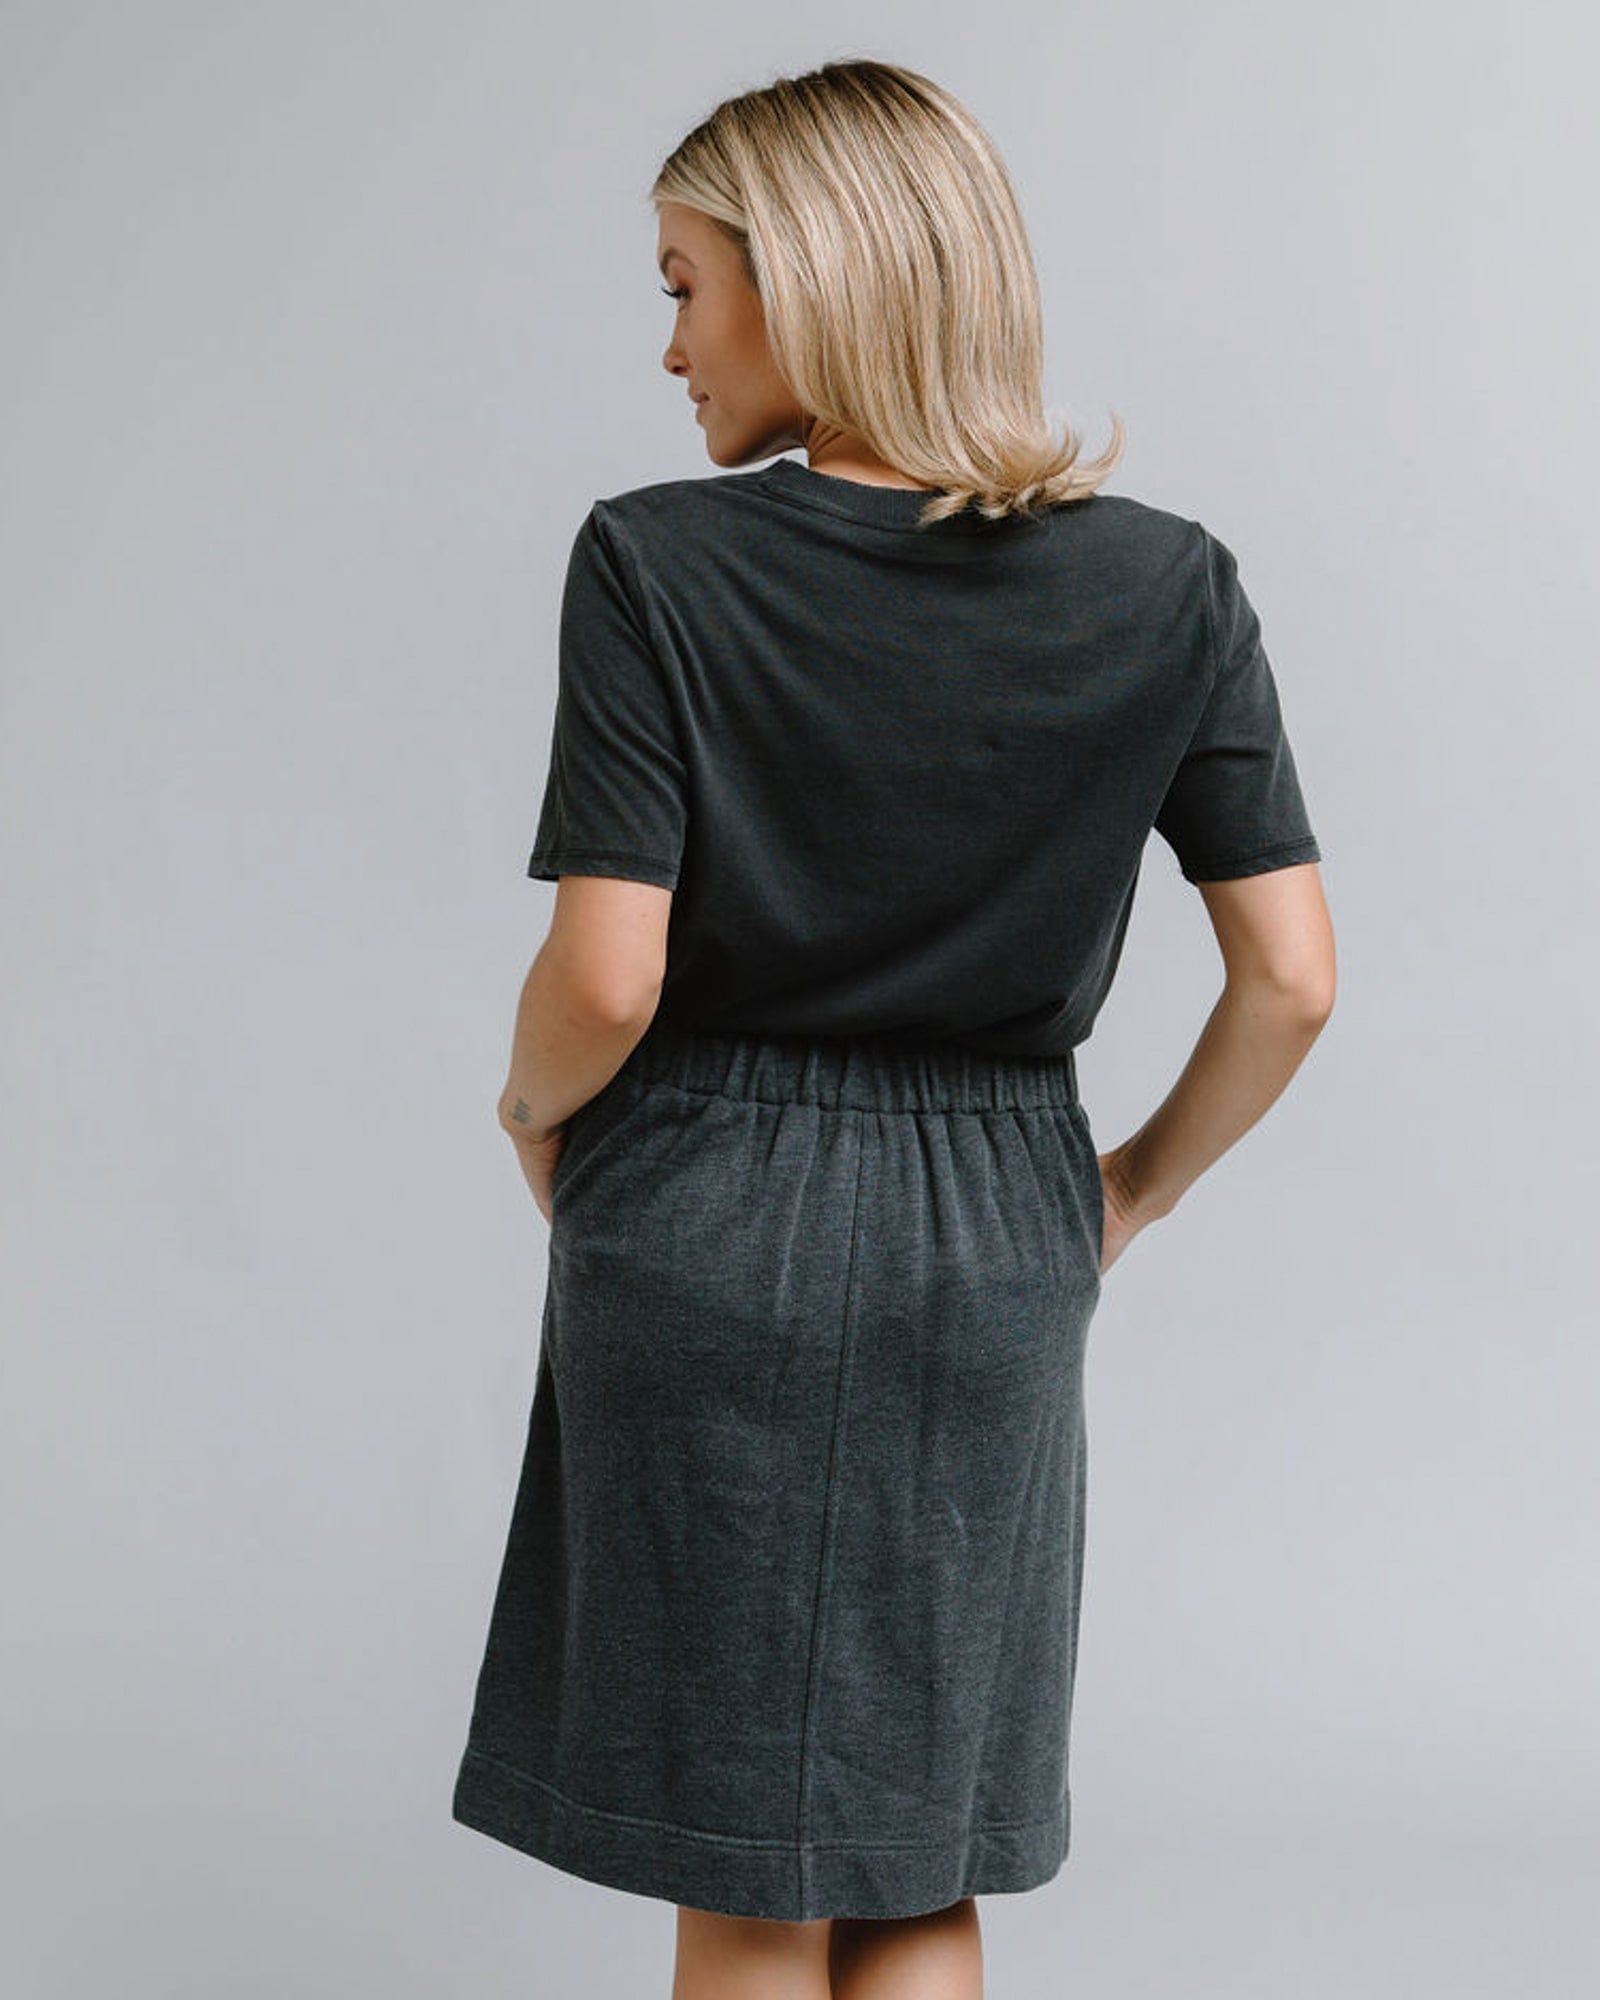 Woman in a gray knee-length skirt with pockets